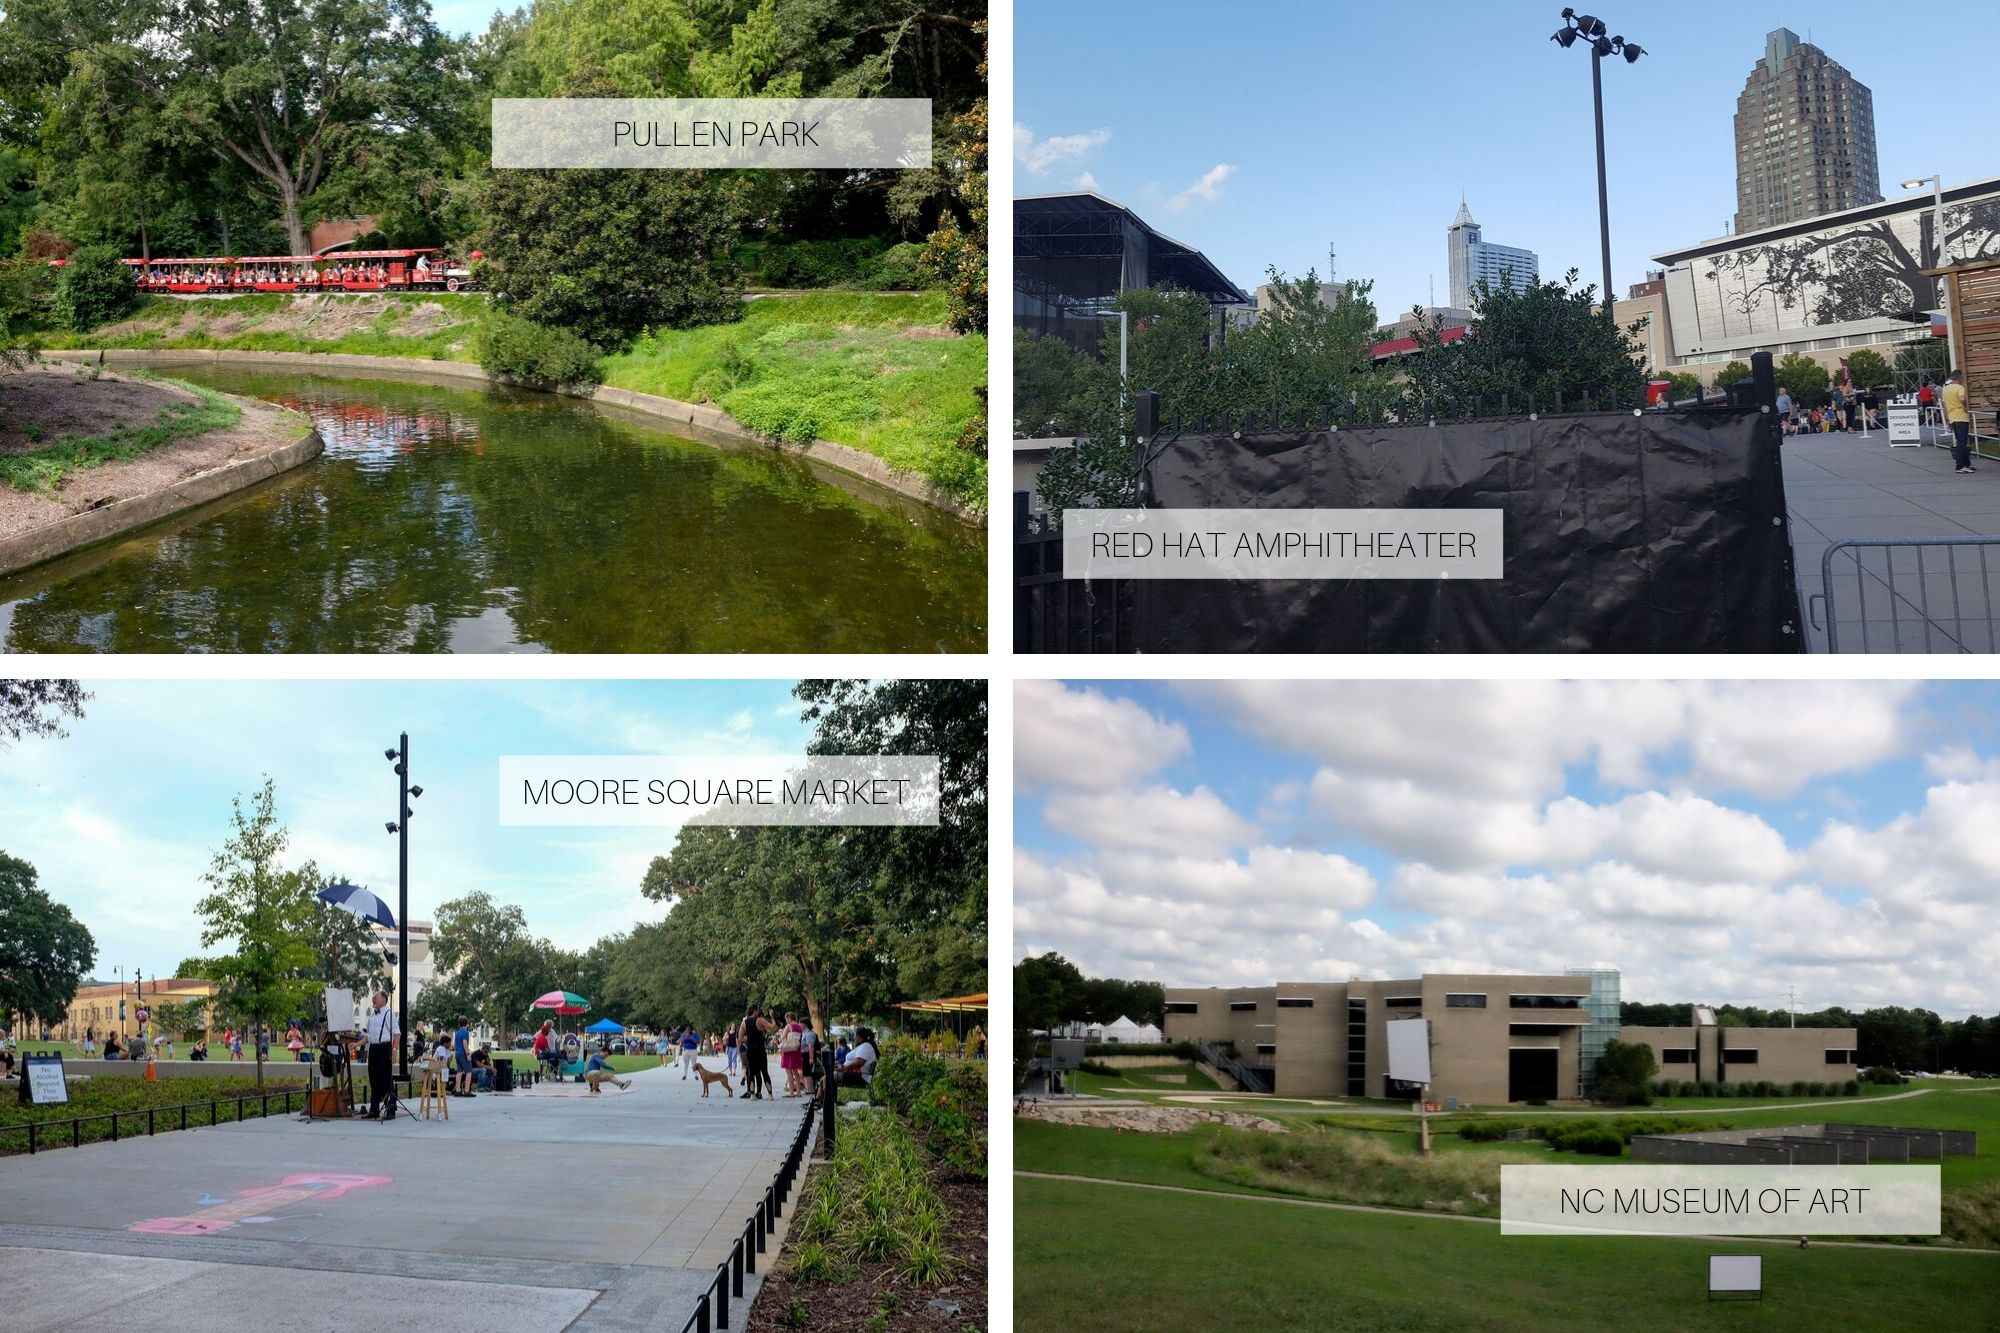 Collage: pullen park, red hat amphitheater, moore square market, and nc art museum